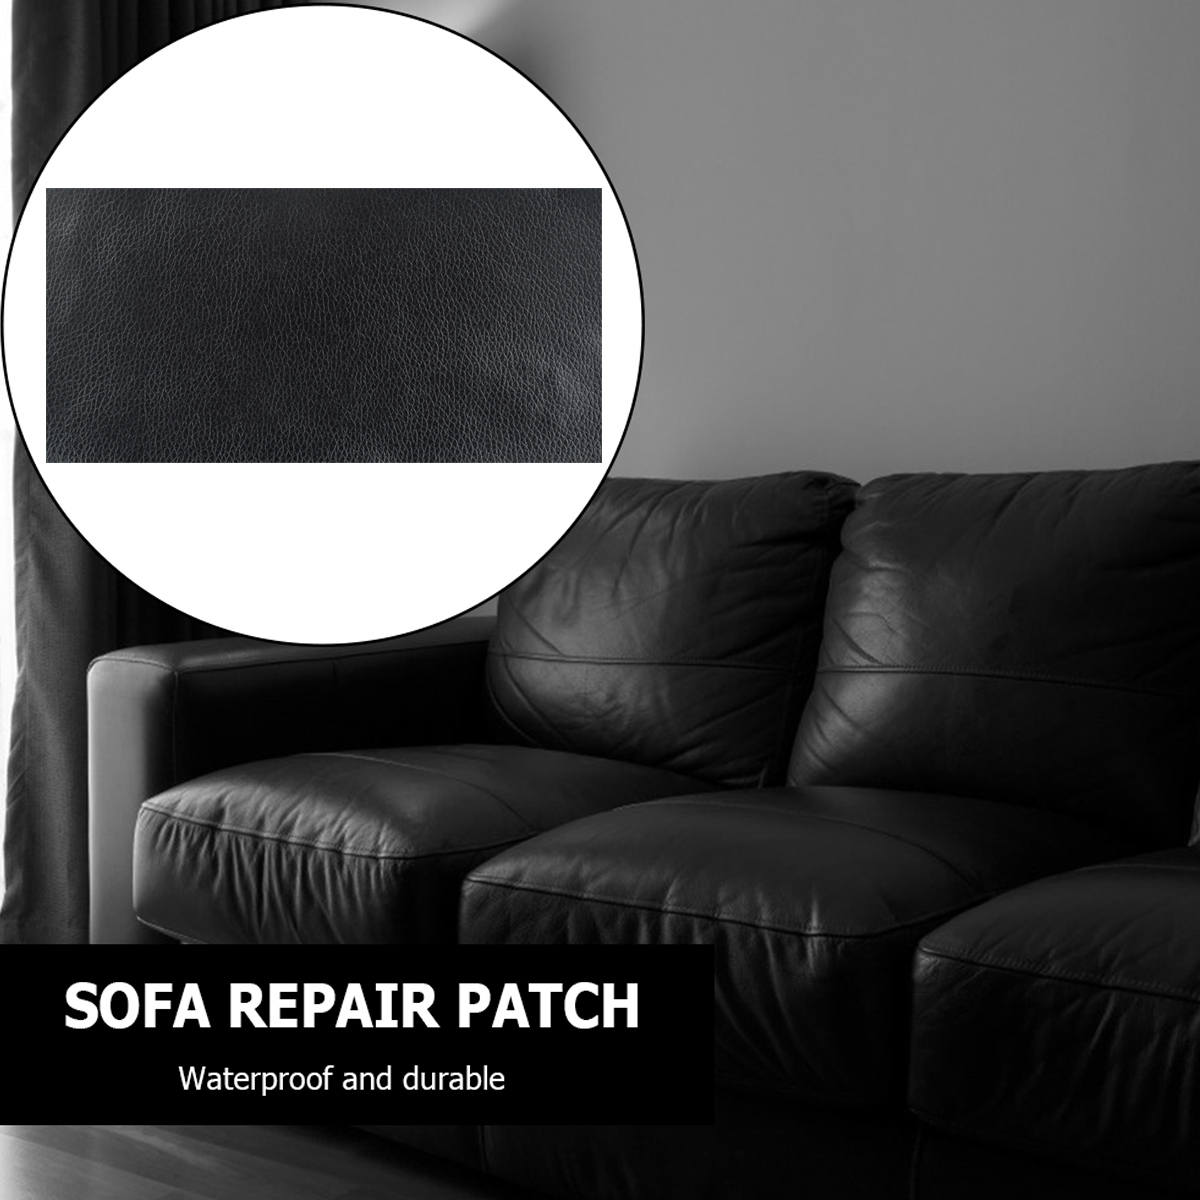 Faux Leather Repair Kit, Leather Patch Kit 20 x 120 cm, Leather Repair Set,  Leather Patches Self-Adhesive for Sofa, Furniture, Bags, Jackets, Car